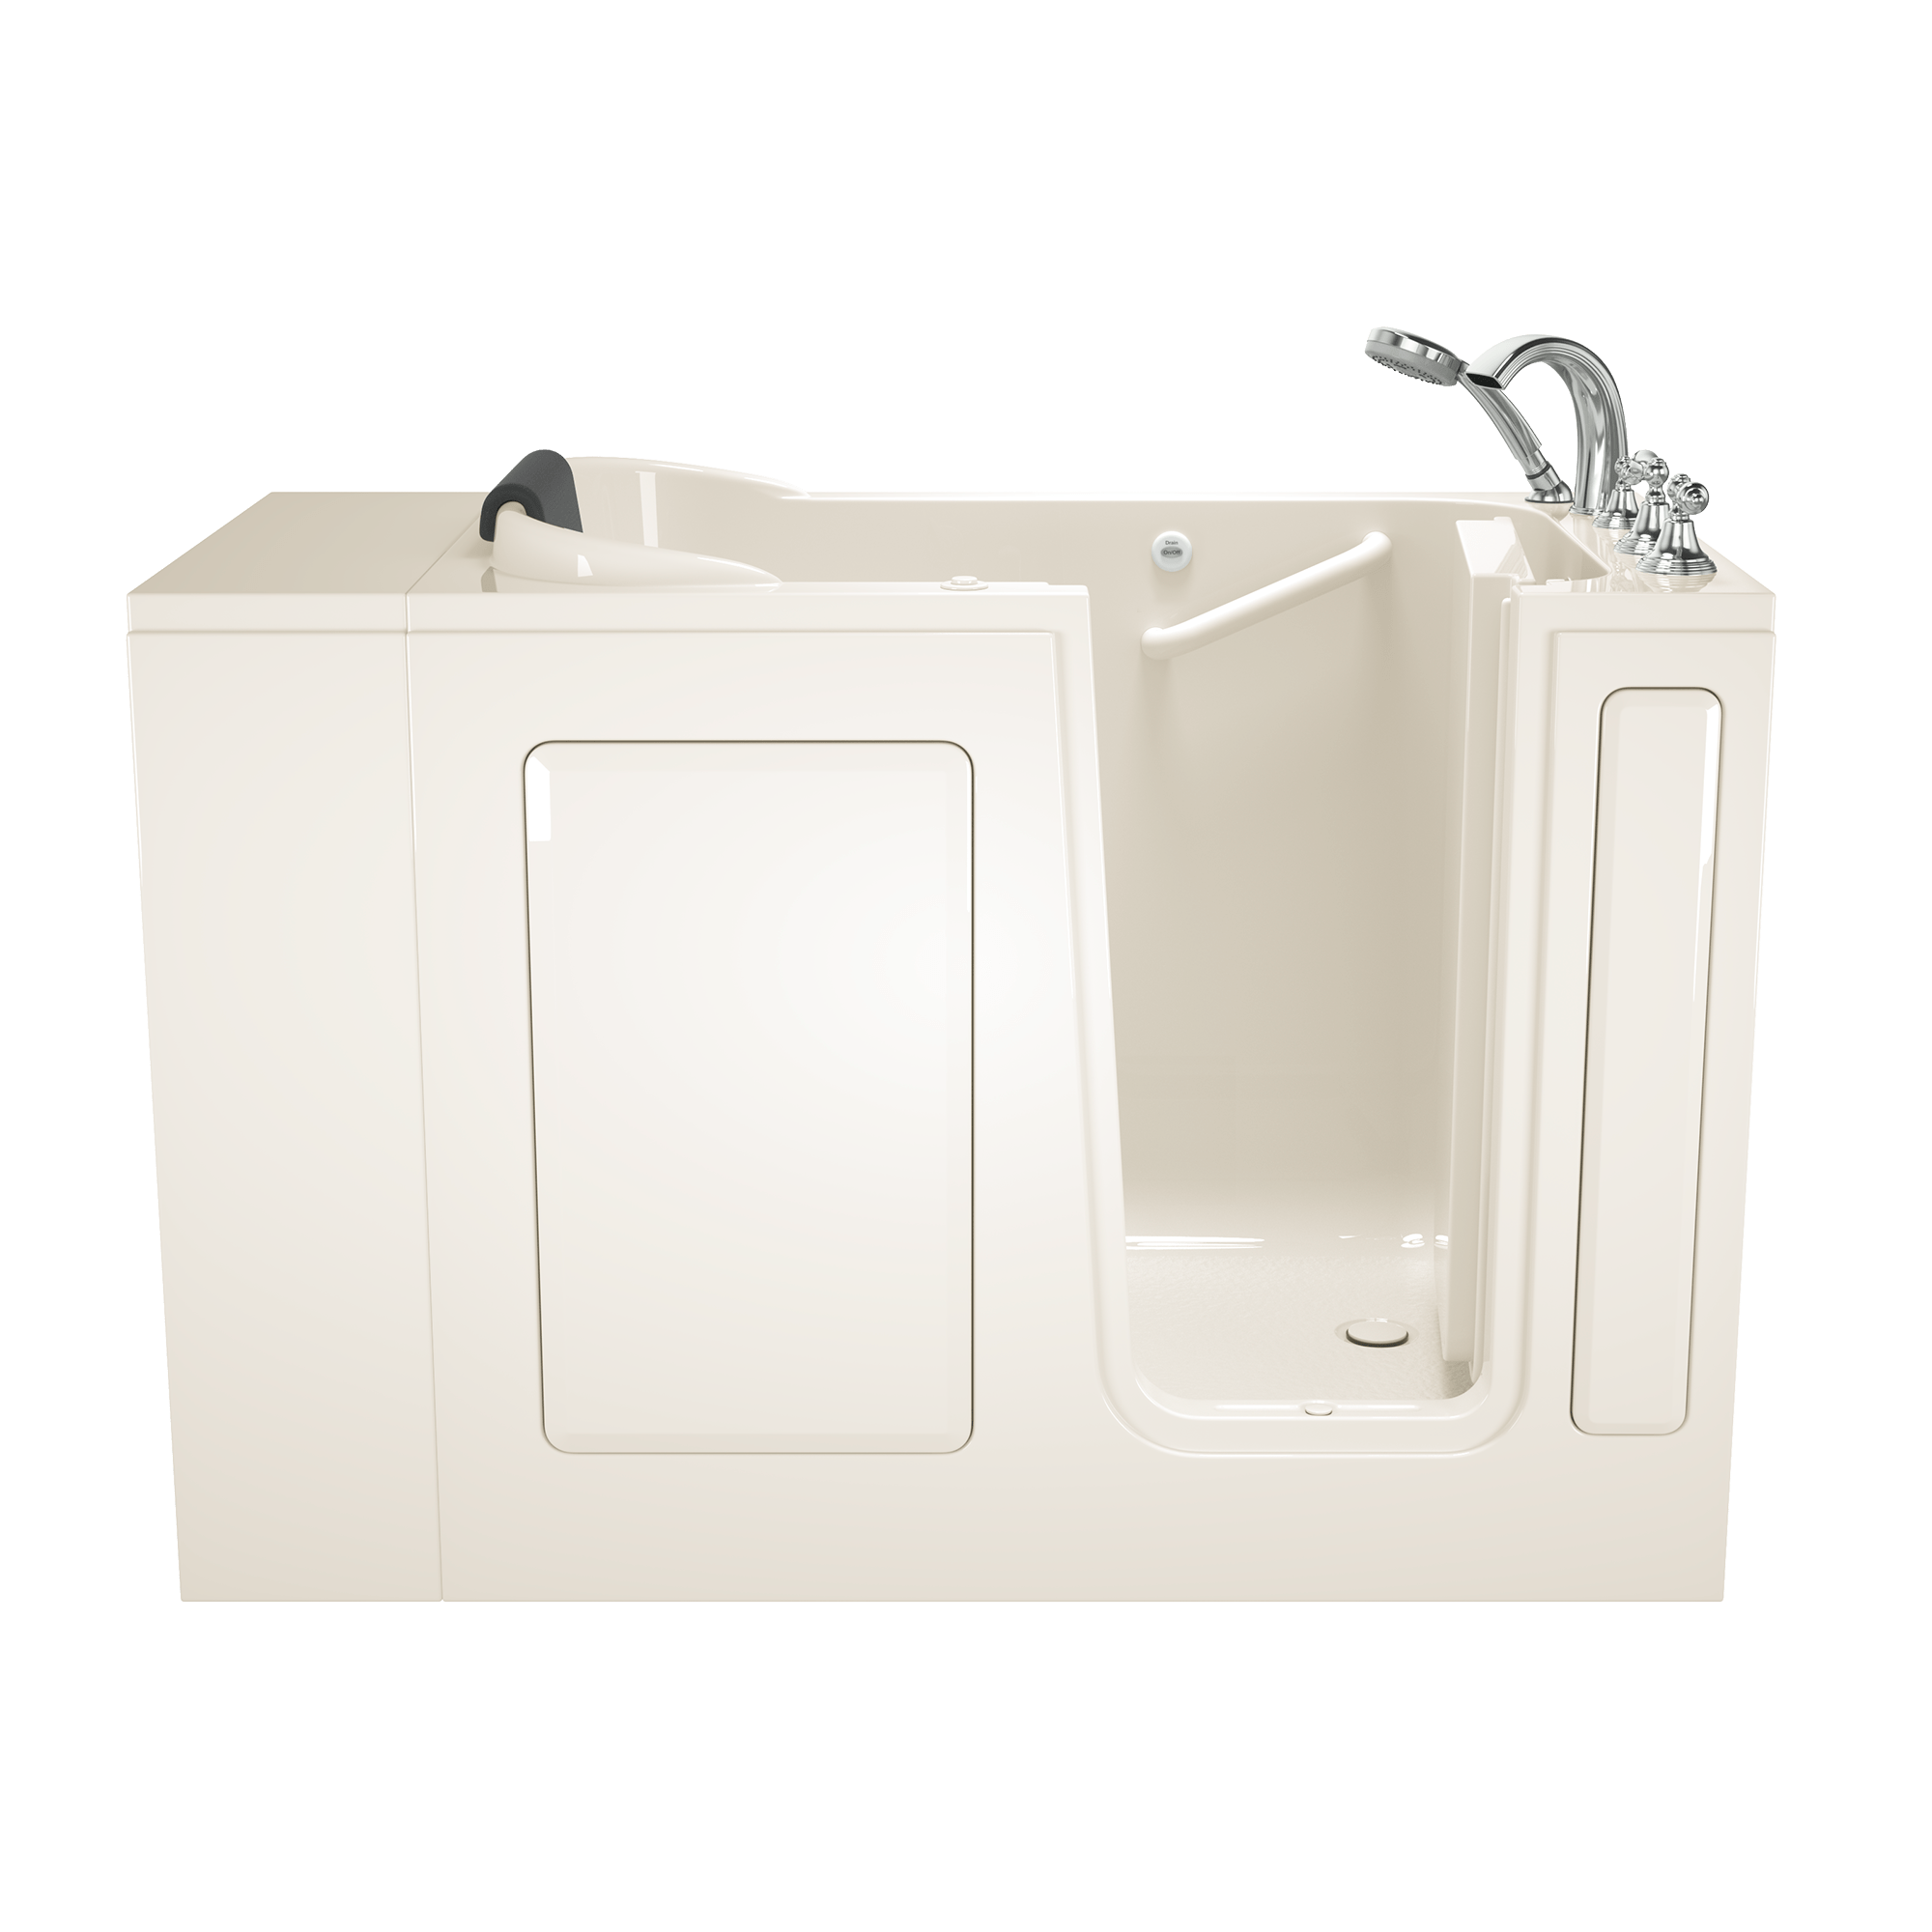 Gelcoat Premium Series 28 x 48-Inch Walk-in Tub With Whirlpool System - Right-Hand Drain With Faucet